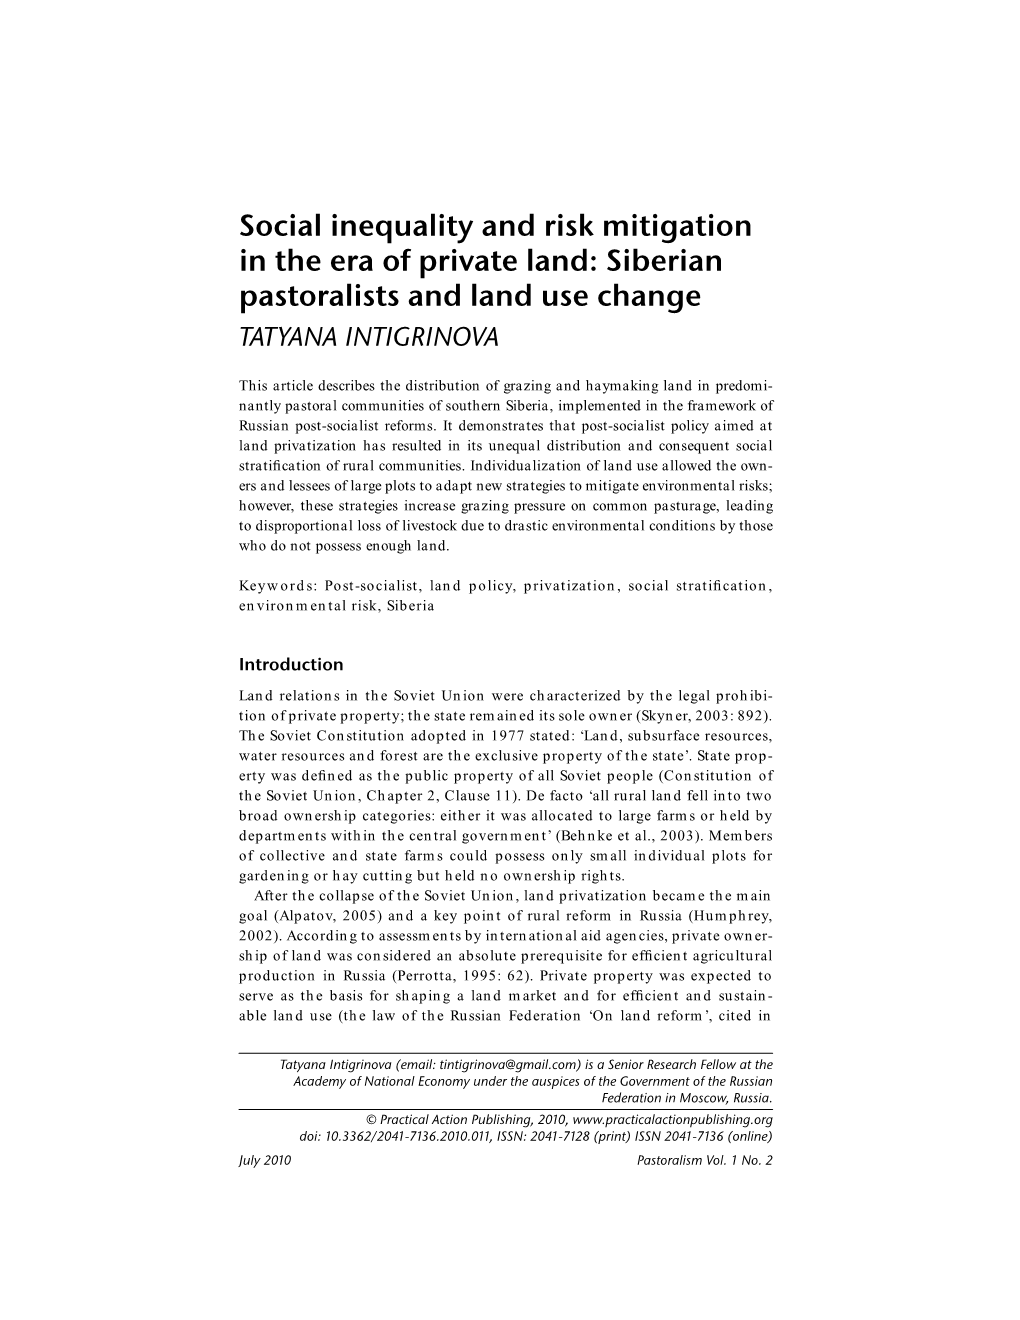 Social Inequality and Risk Mitigation in the Era of Private Land: Siberian Pastoralists and Land Use Change TATYANA INTIGRINOVA